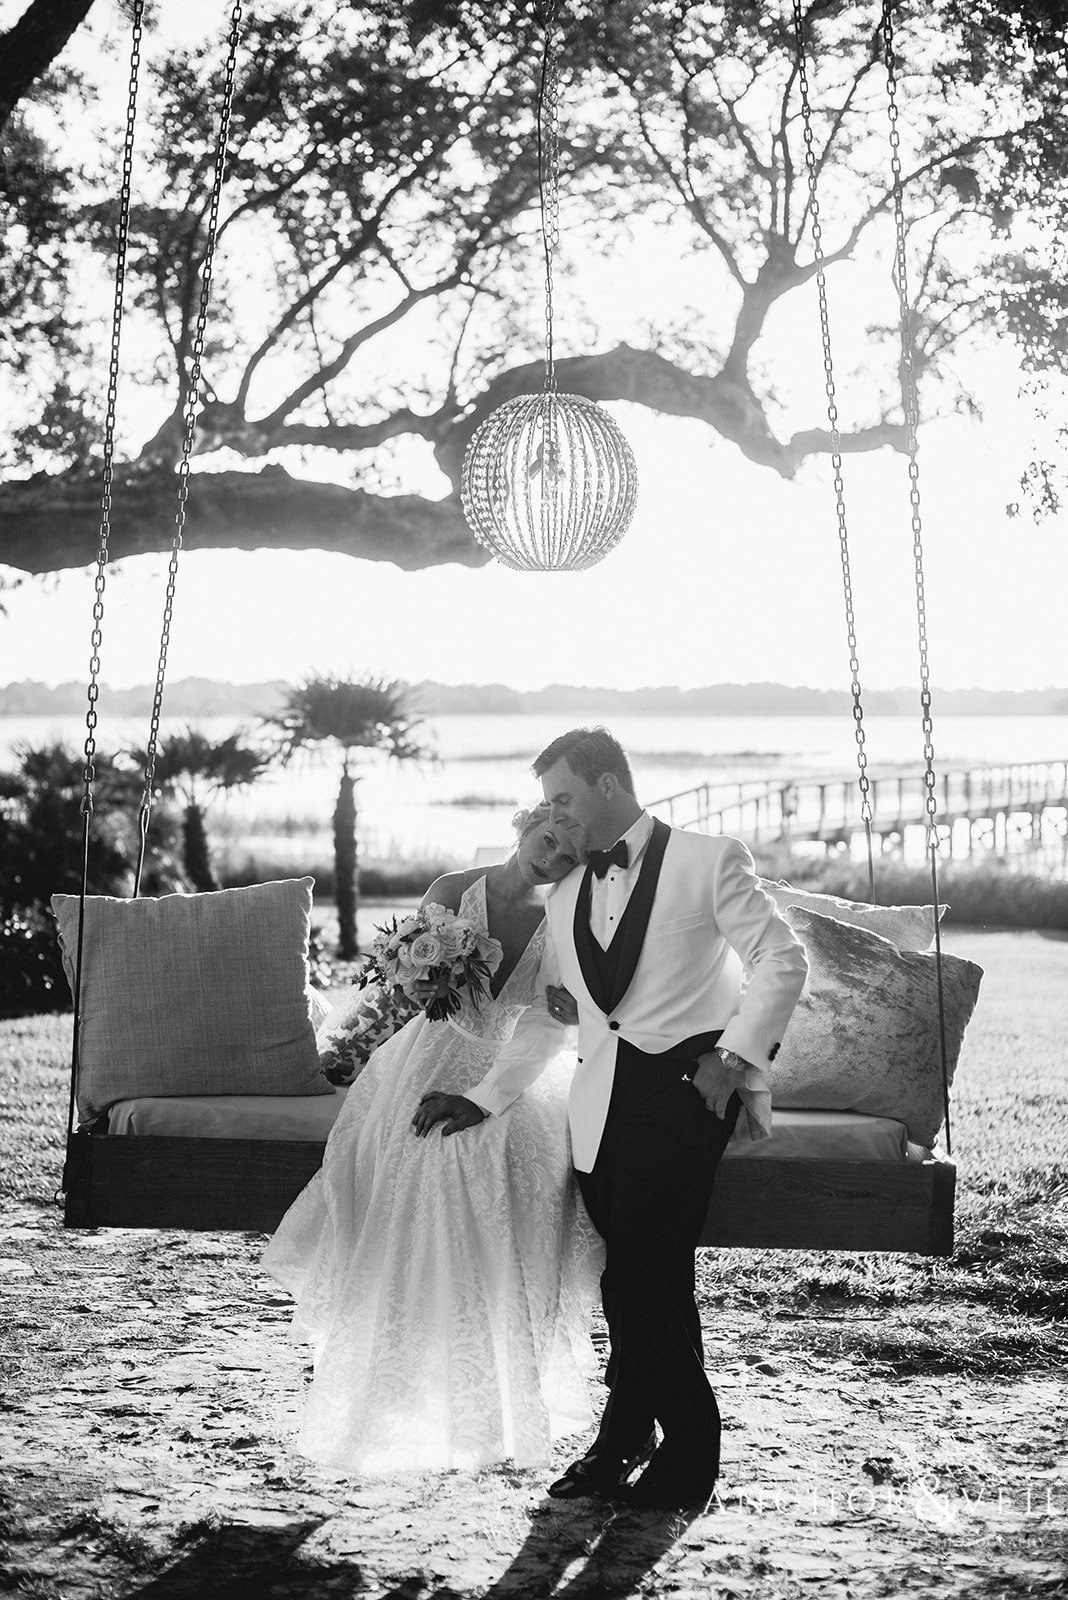 The bridge and groom on the swing in the garden at the Lowndes Grove Plantation Wedding